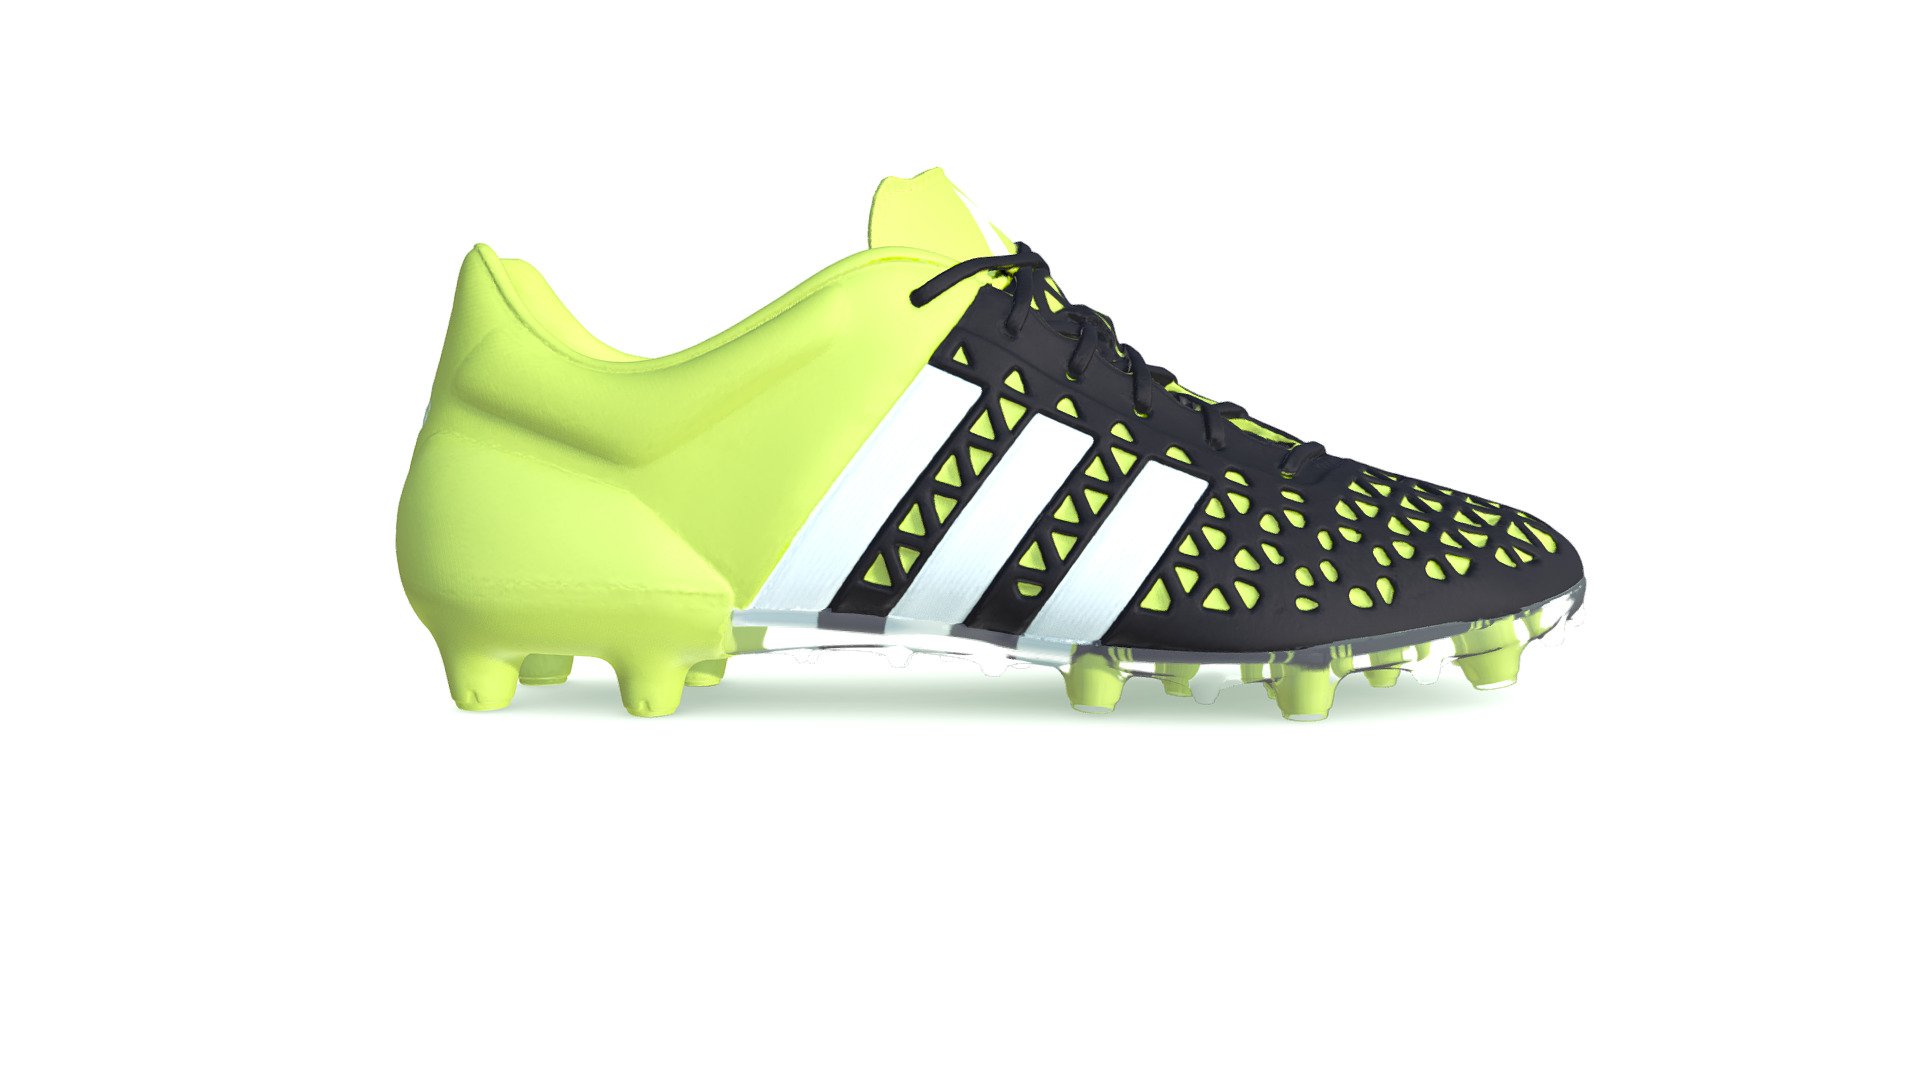 3D Scan of Adidas ACE 15.1 SG Football Boots using Artec Space Spider - Adidas ACE 15.1 SG Football boots - 3D model by Europac3d 3d model